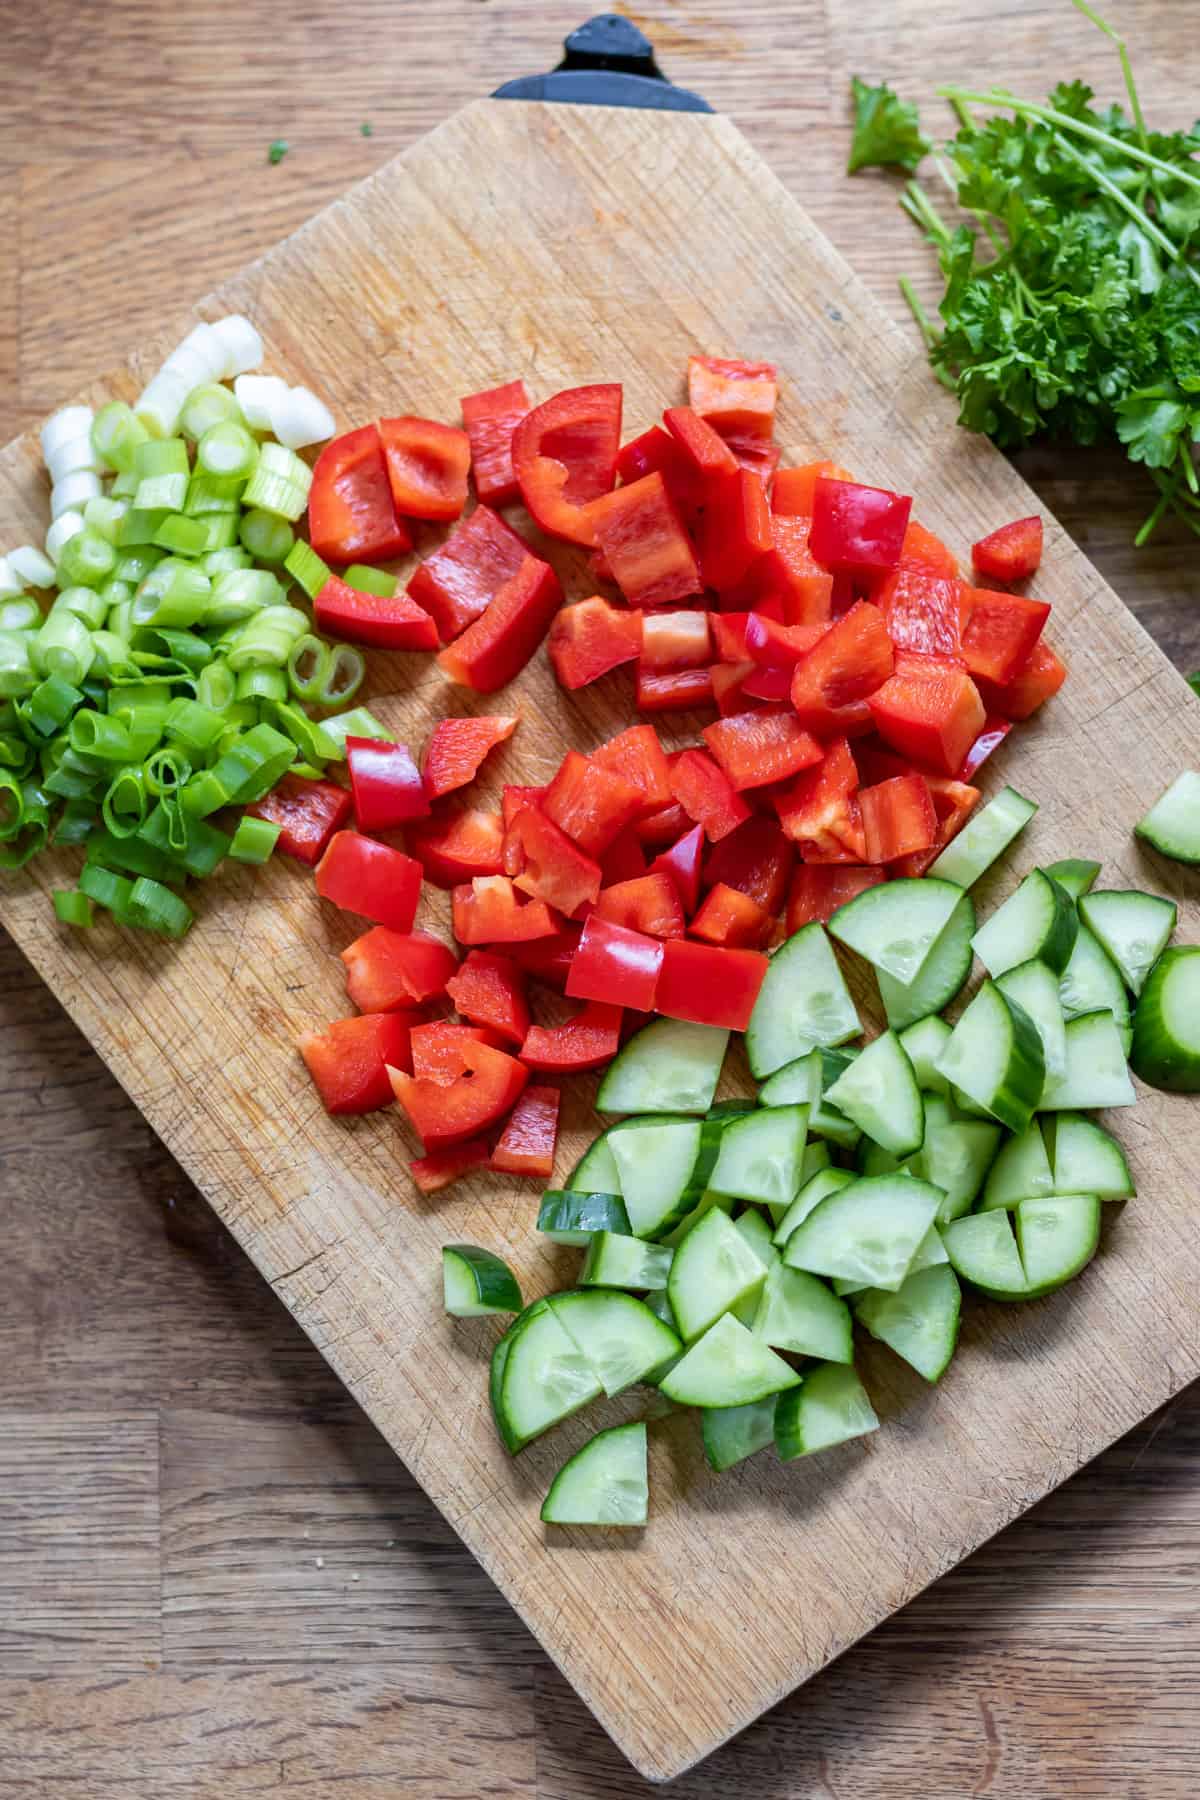 Chopped scallions, bell pepper and cucumber.